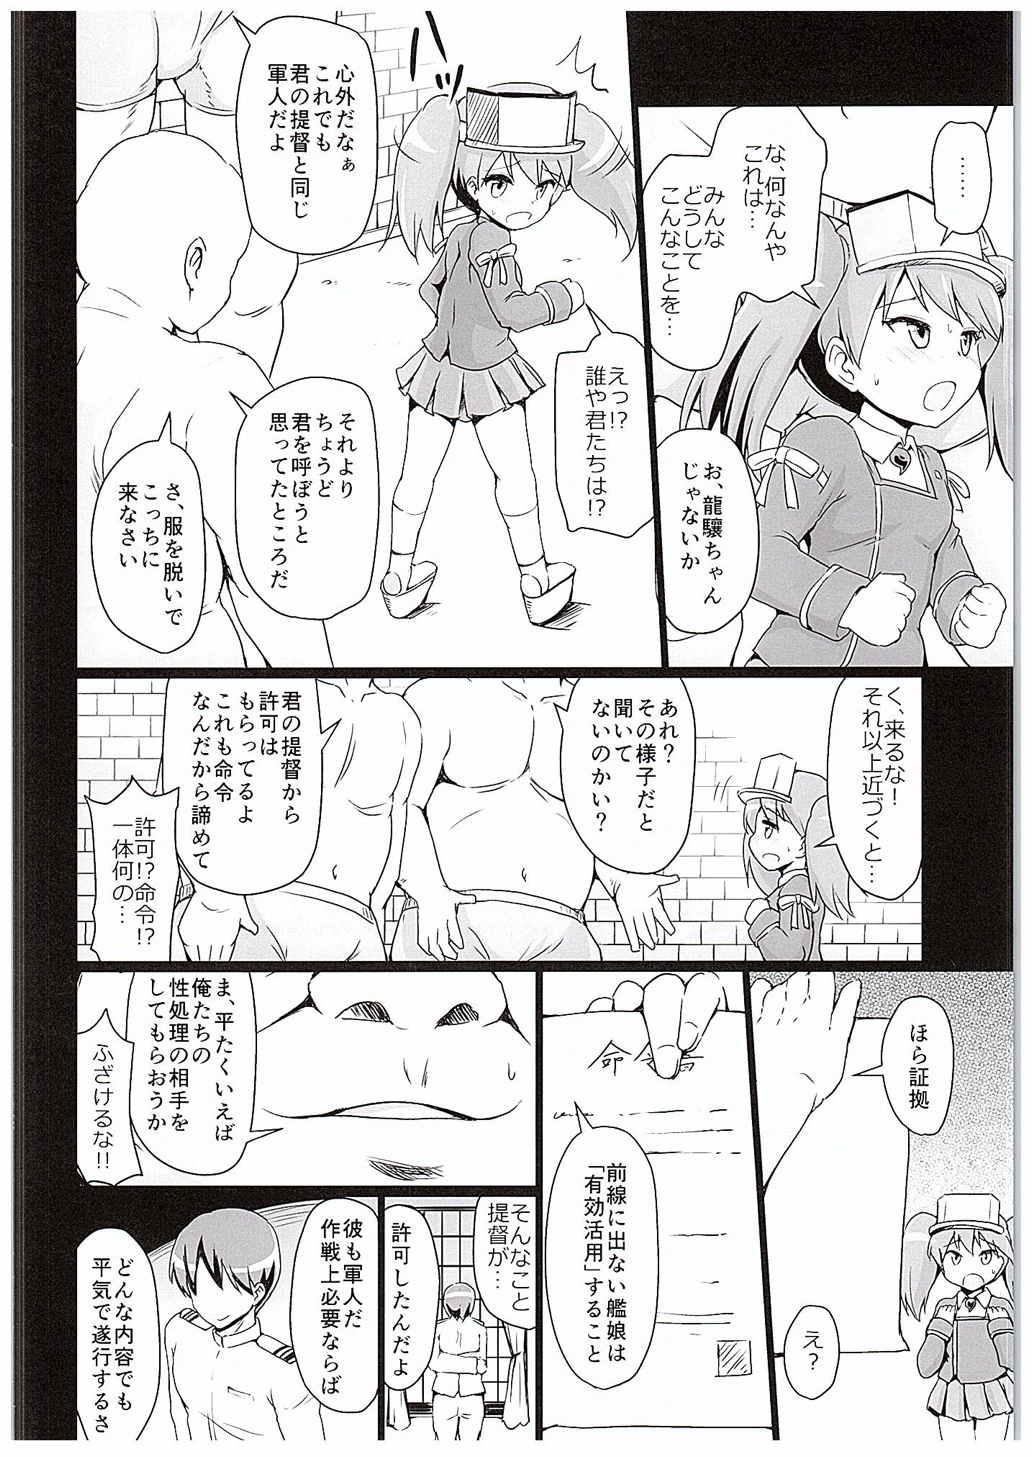 Jap The naval arsenal - Kantai collection Ftvgirls - Page 5